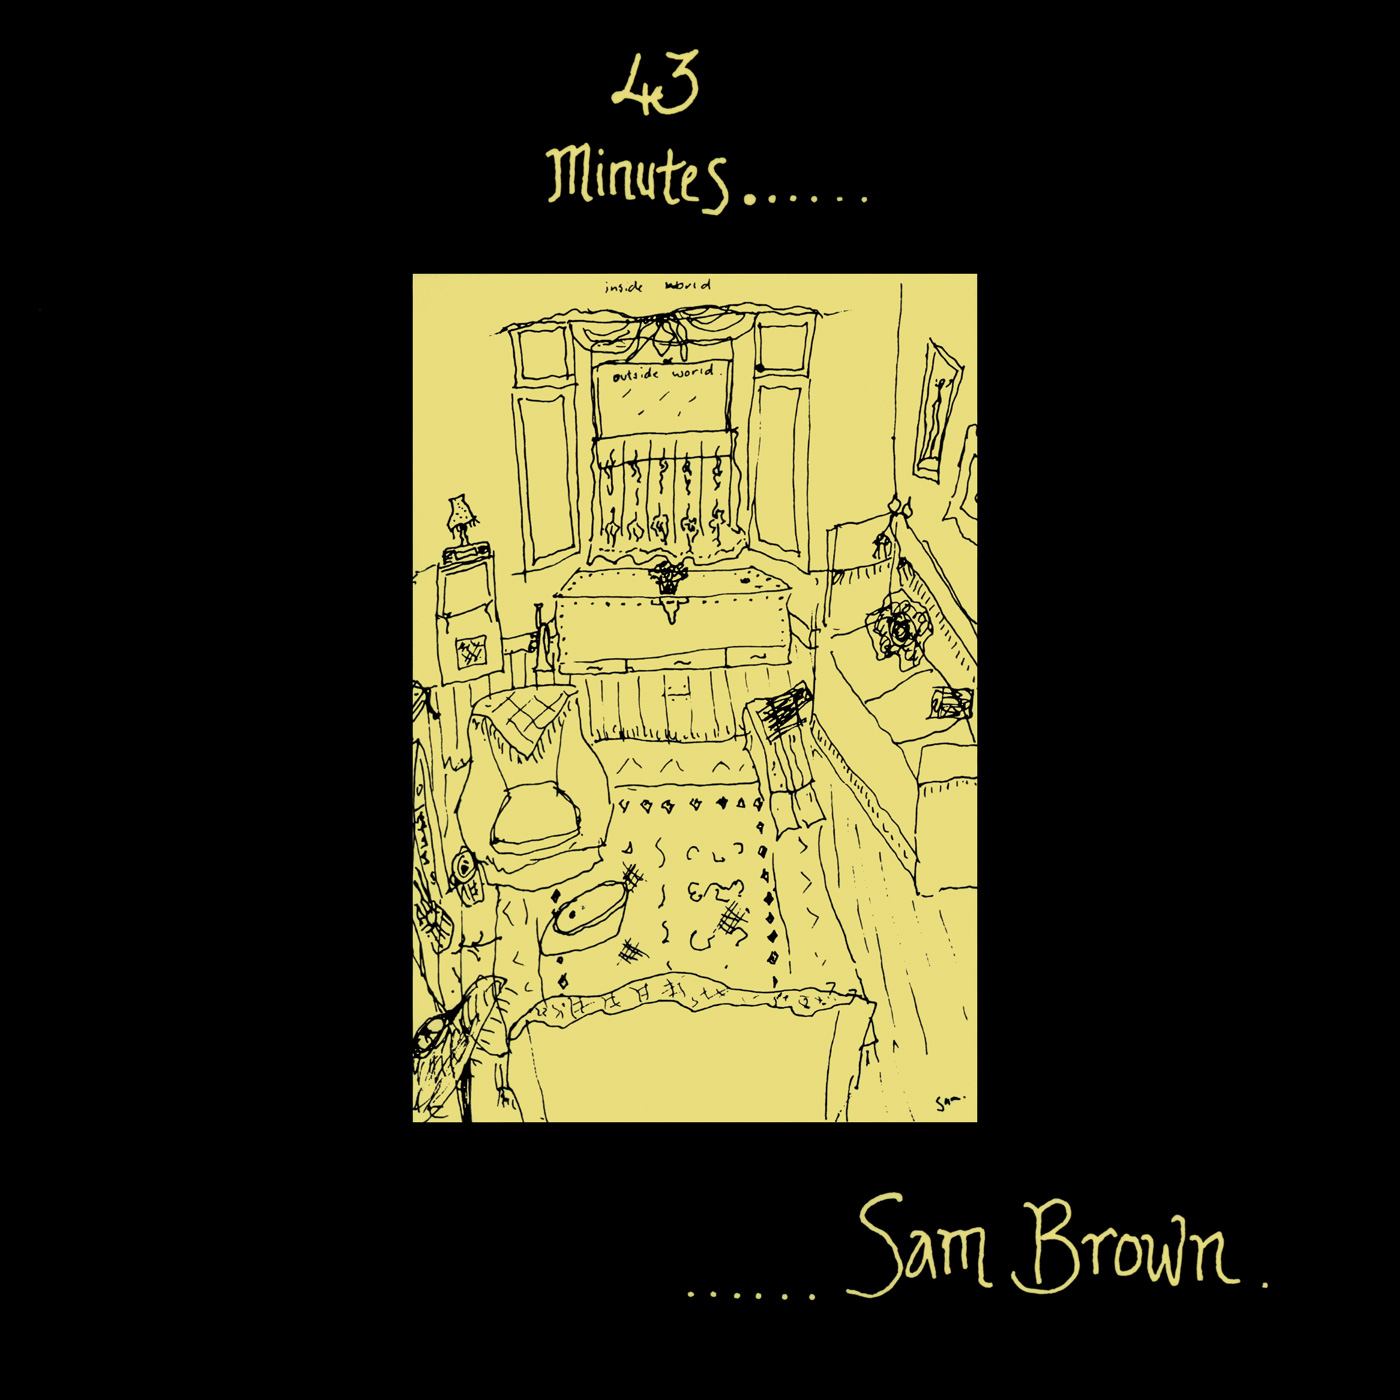 Cover of '43 Minutes' - Sam Brown